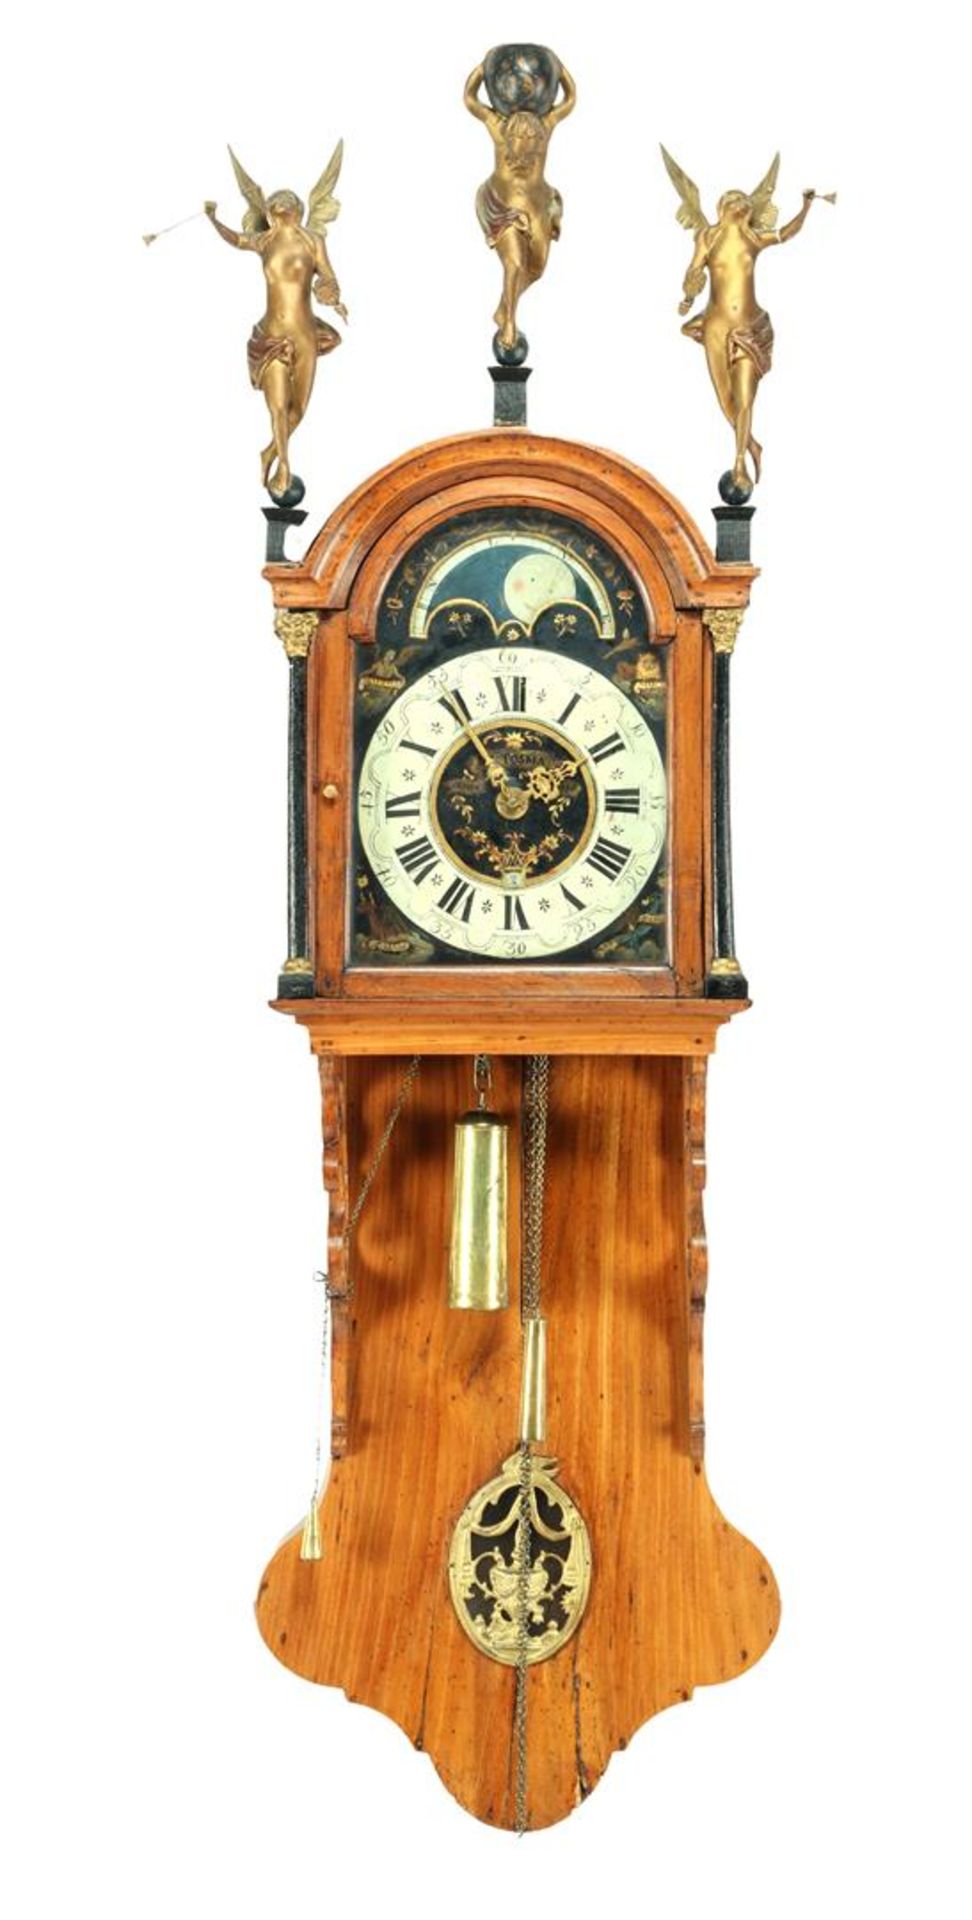 Frisian tail clock with double bell, painted dial with Matthew, Mark, Luke and John and moon